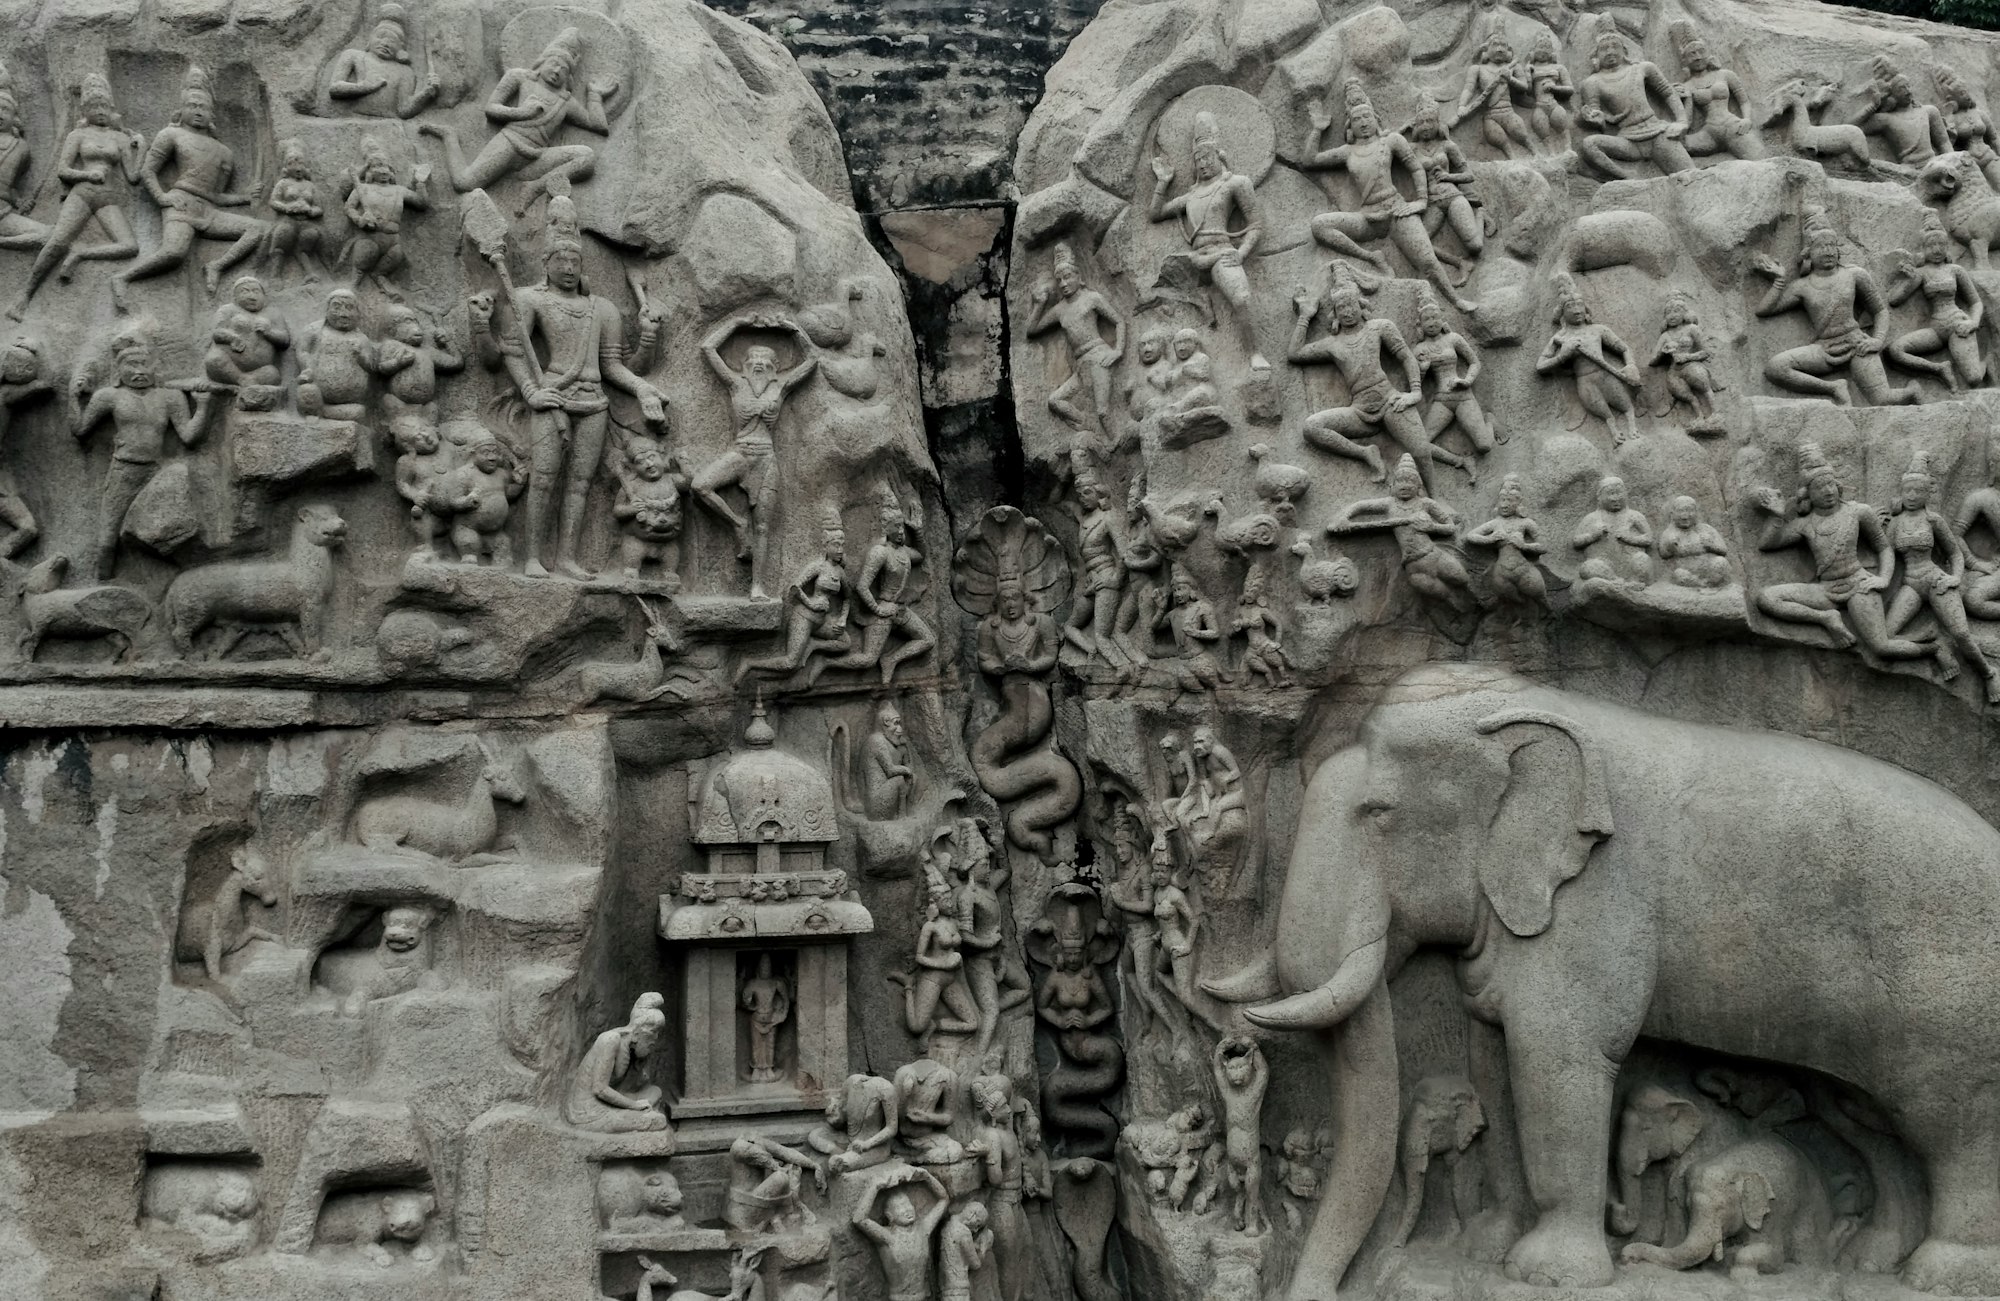 Artful carvings by the Pallavas